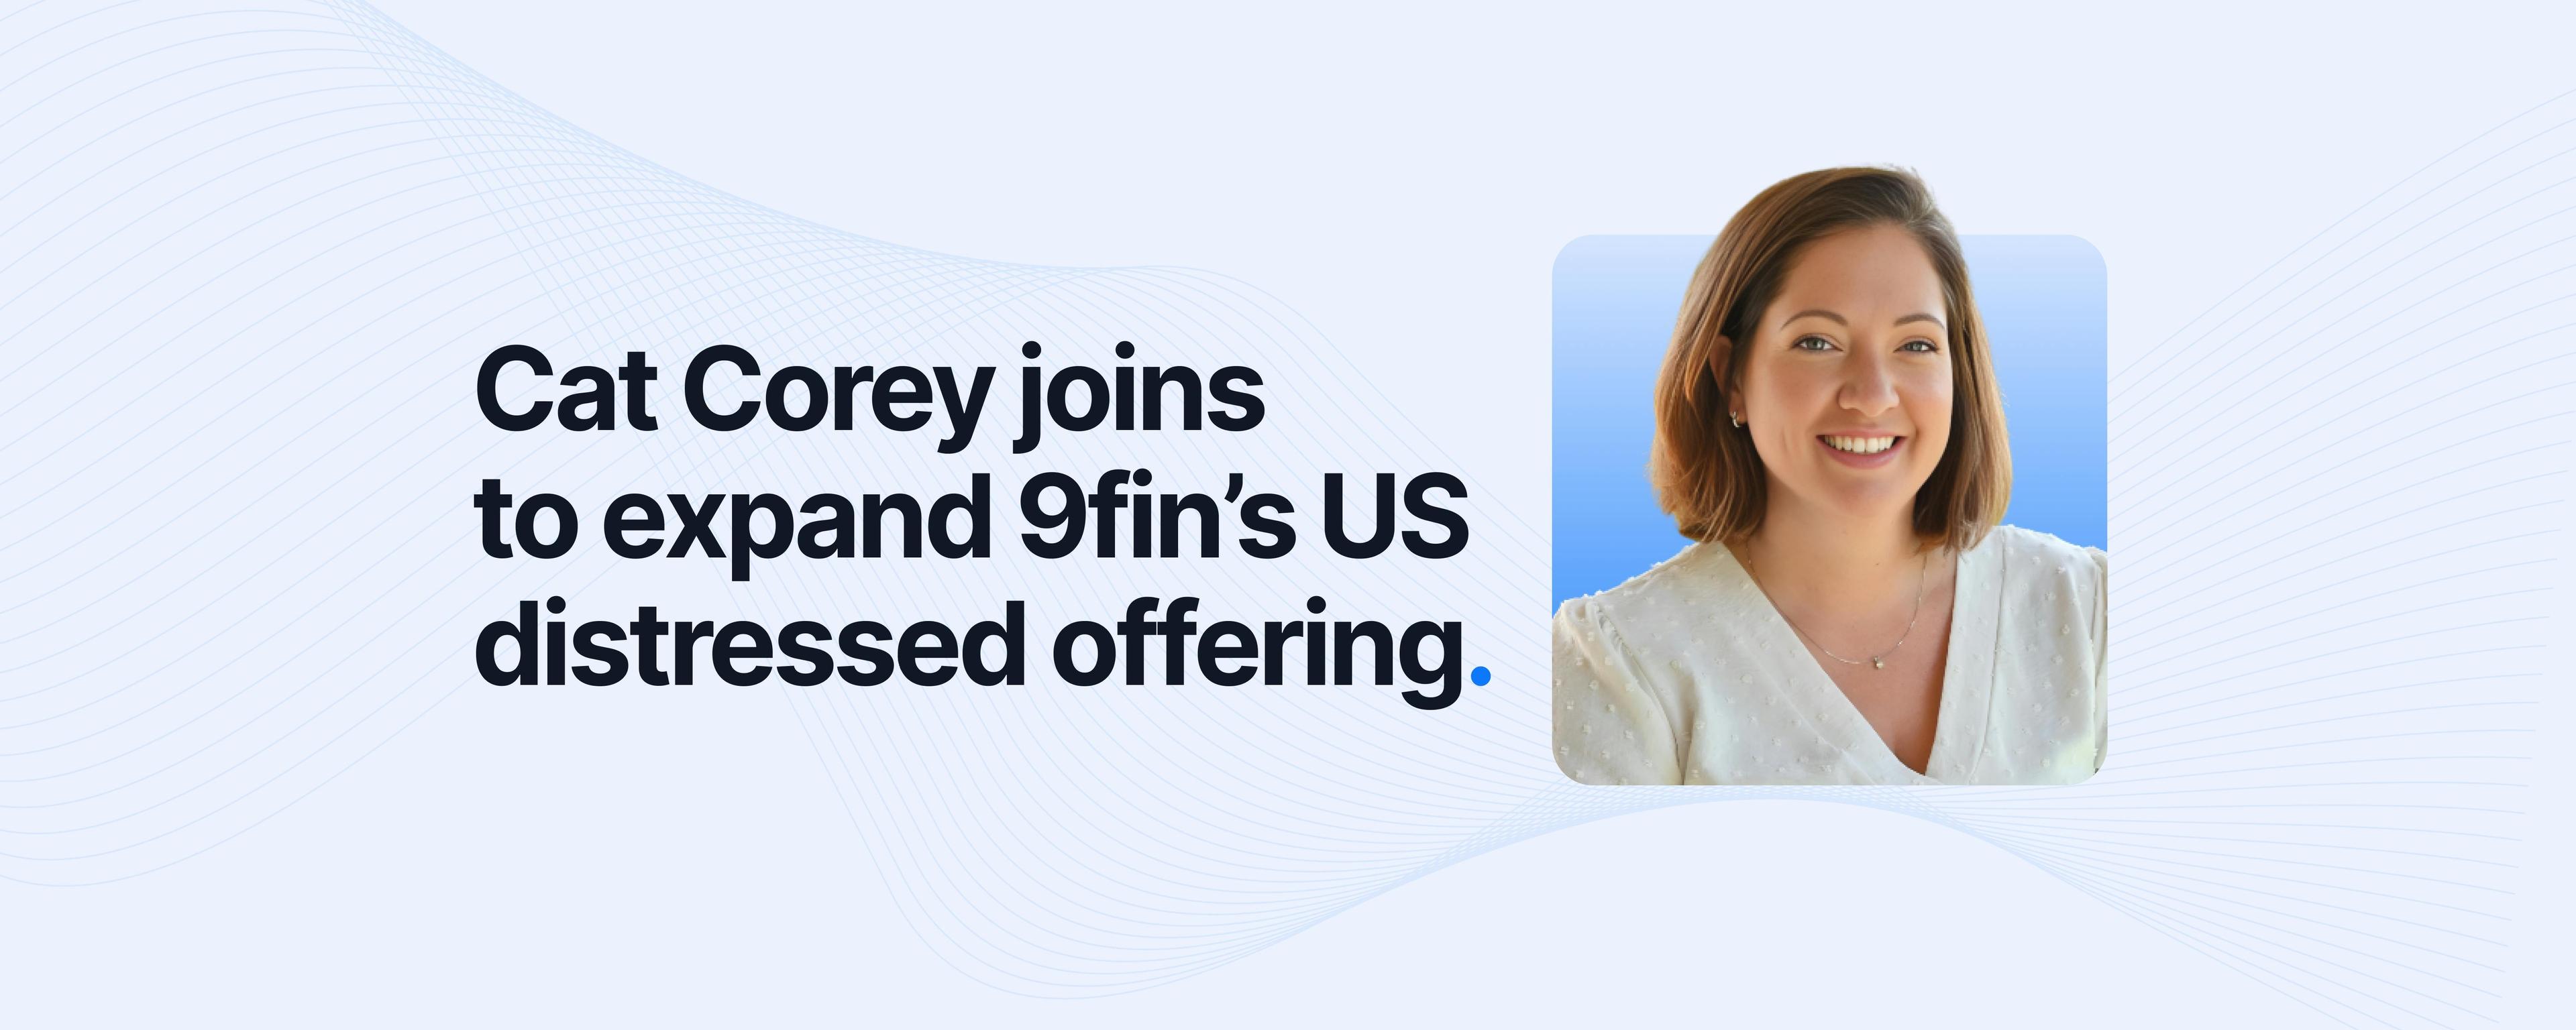 Cat Corey joins 9fin’s US distressed team